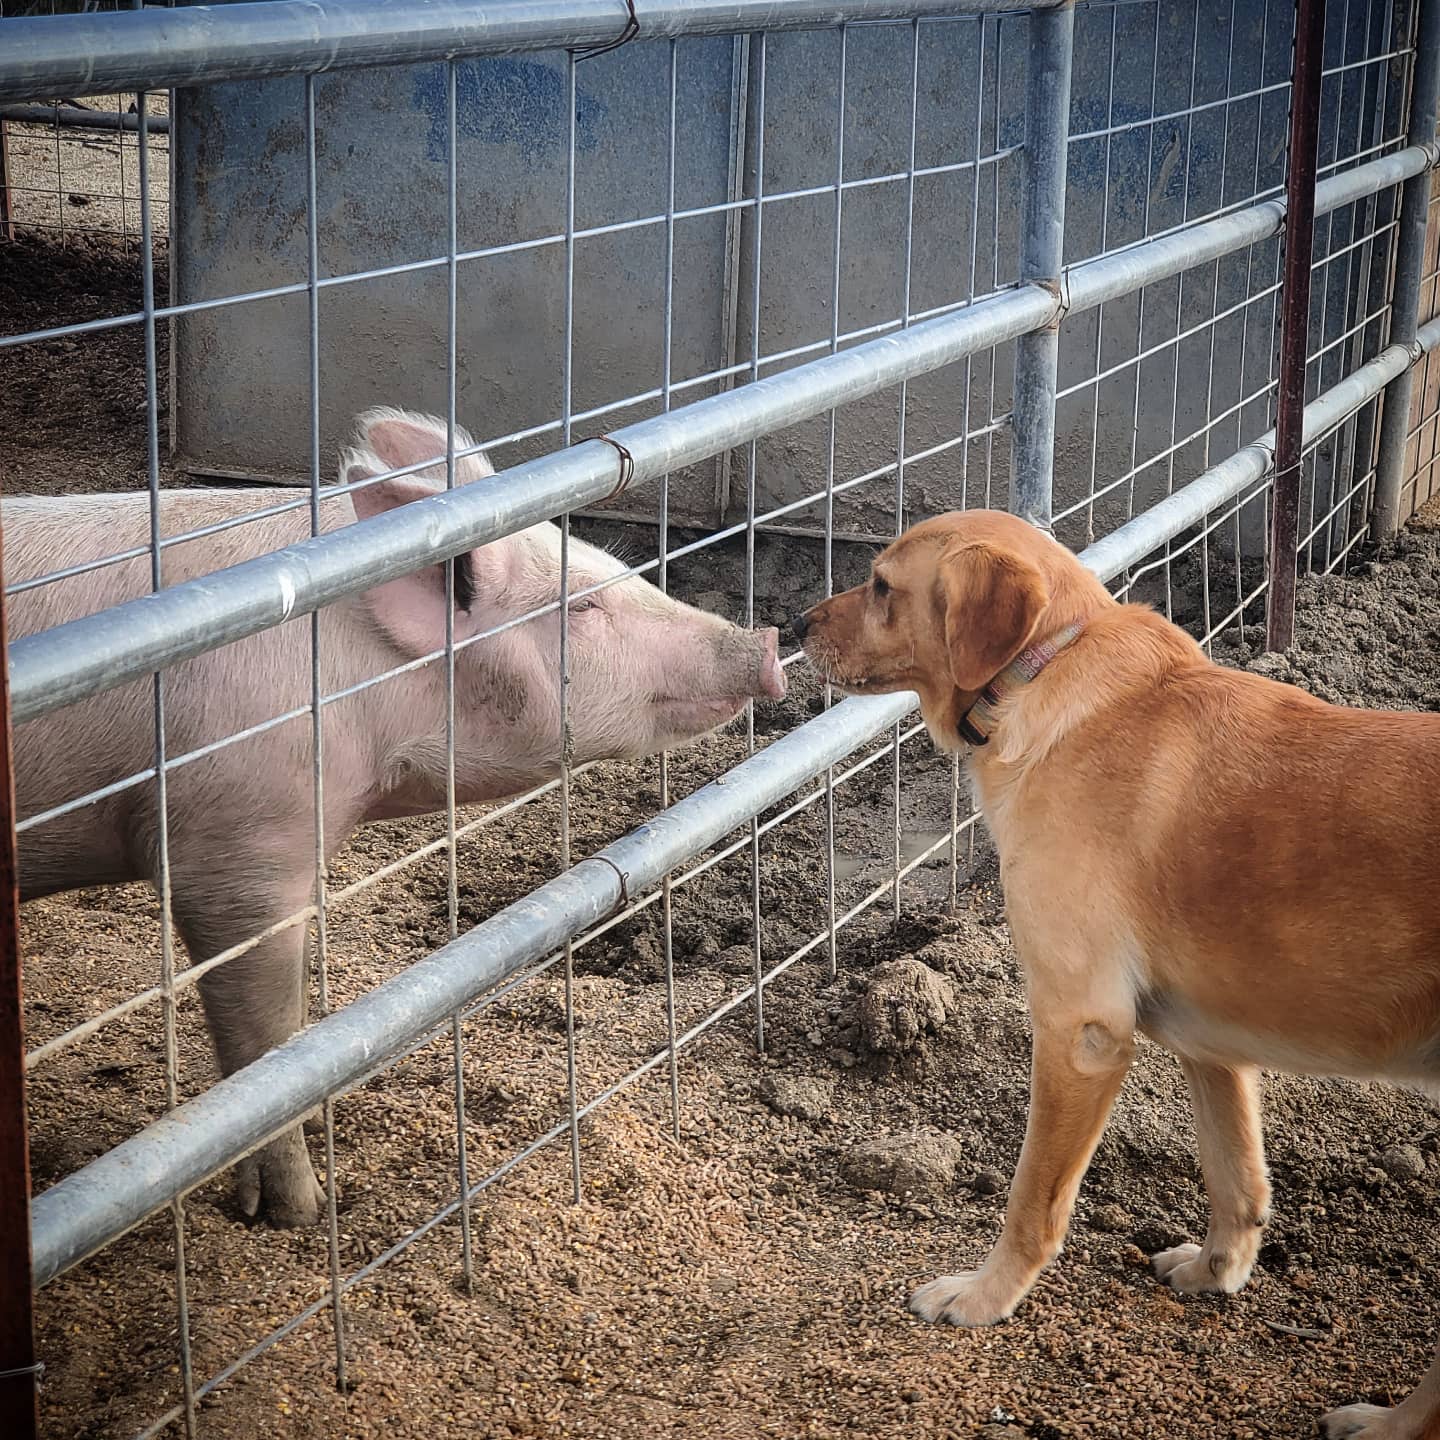 Pig and dog nose to nose at fence photo